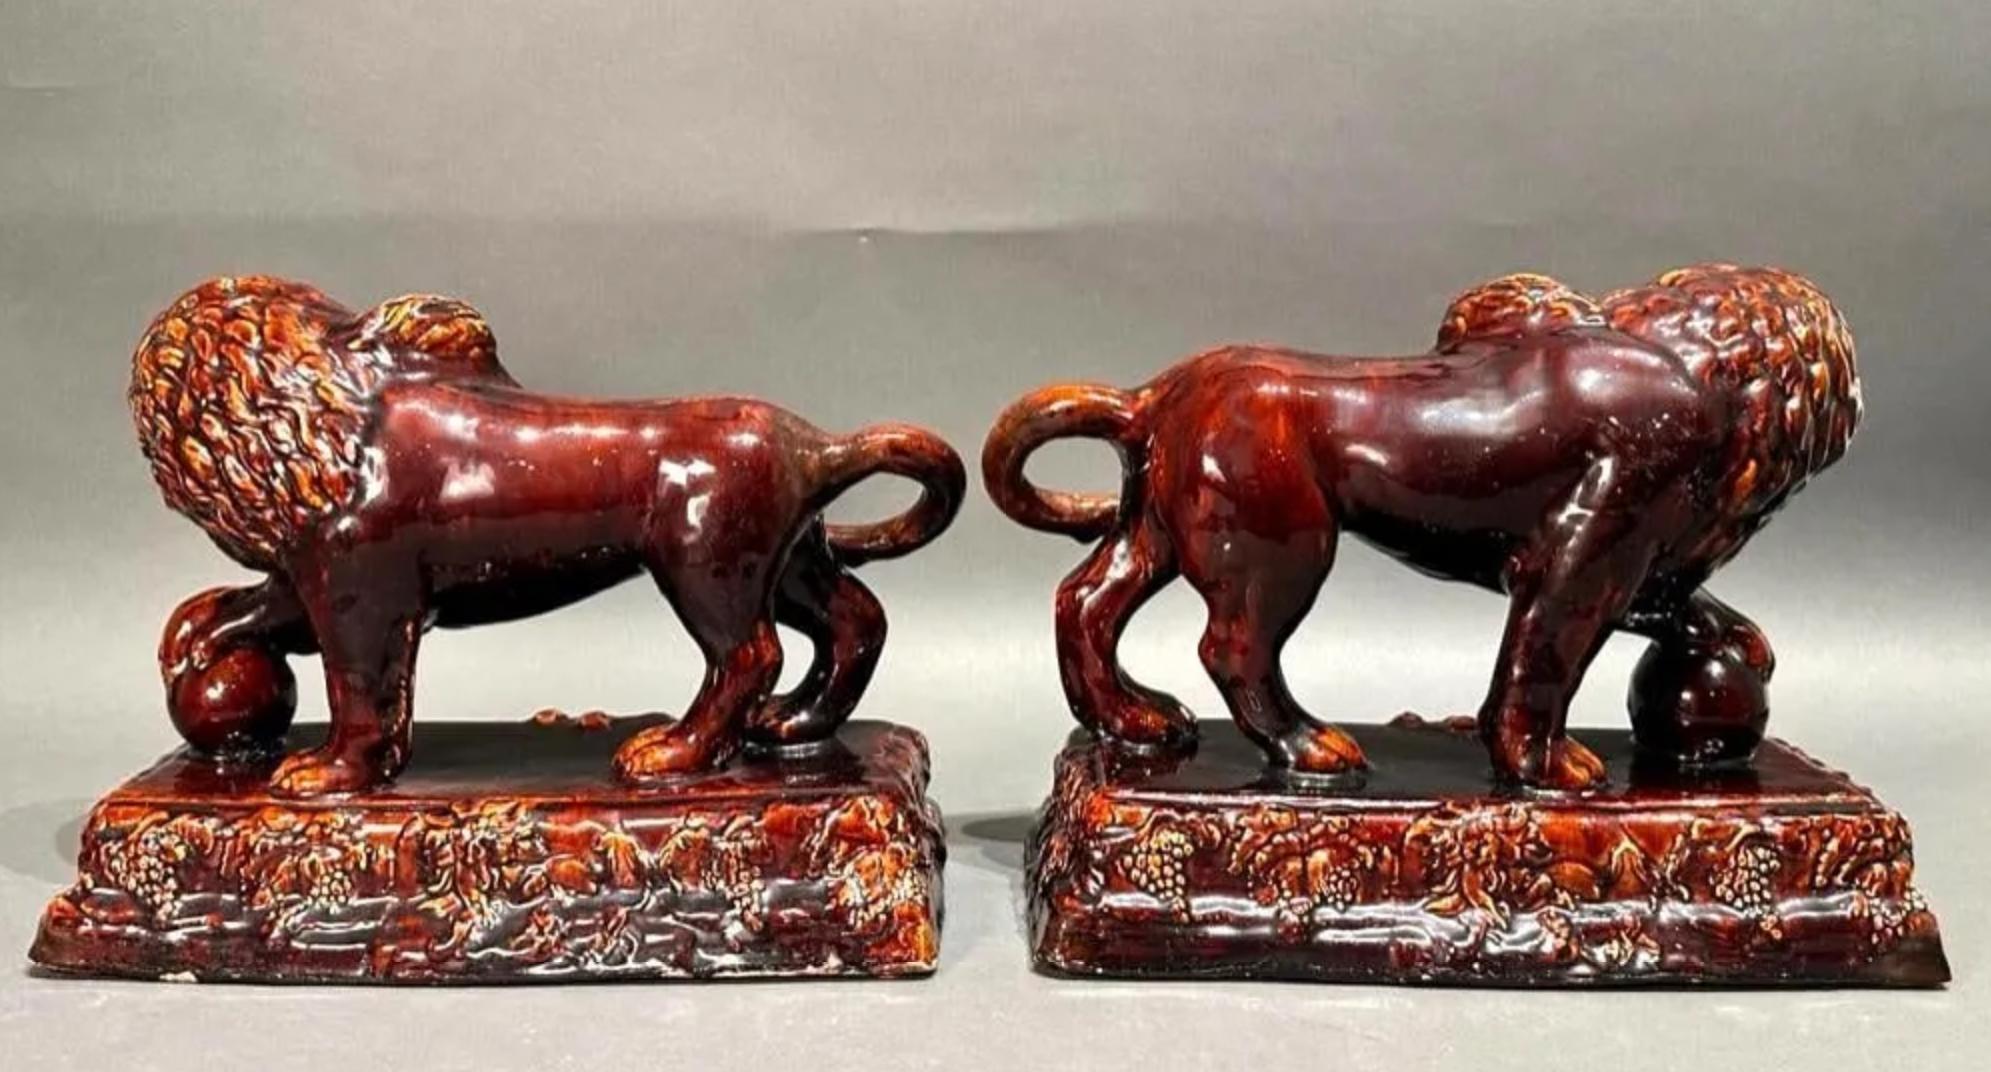 Pair of Large Antique Rockingham Pottery Medici Lions c.1840. Each featuring an unusual red undertone to the classic brown Rockingham finish.